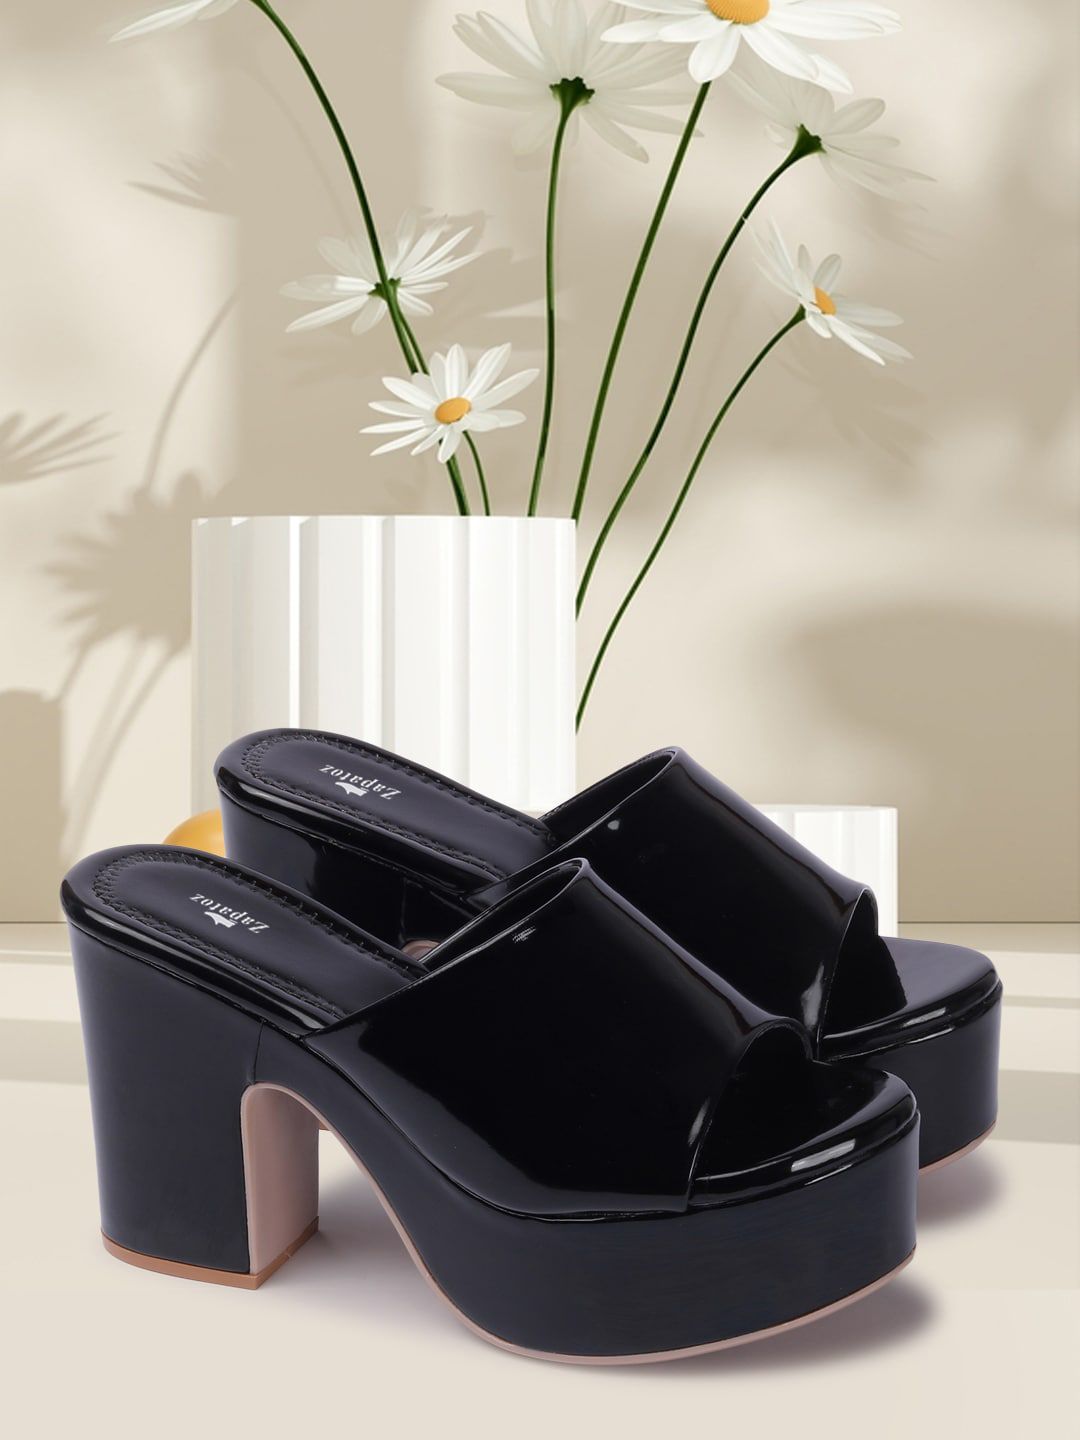 ZAPATOZ Black PU Block Pumps with Bows Price in India